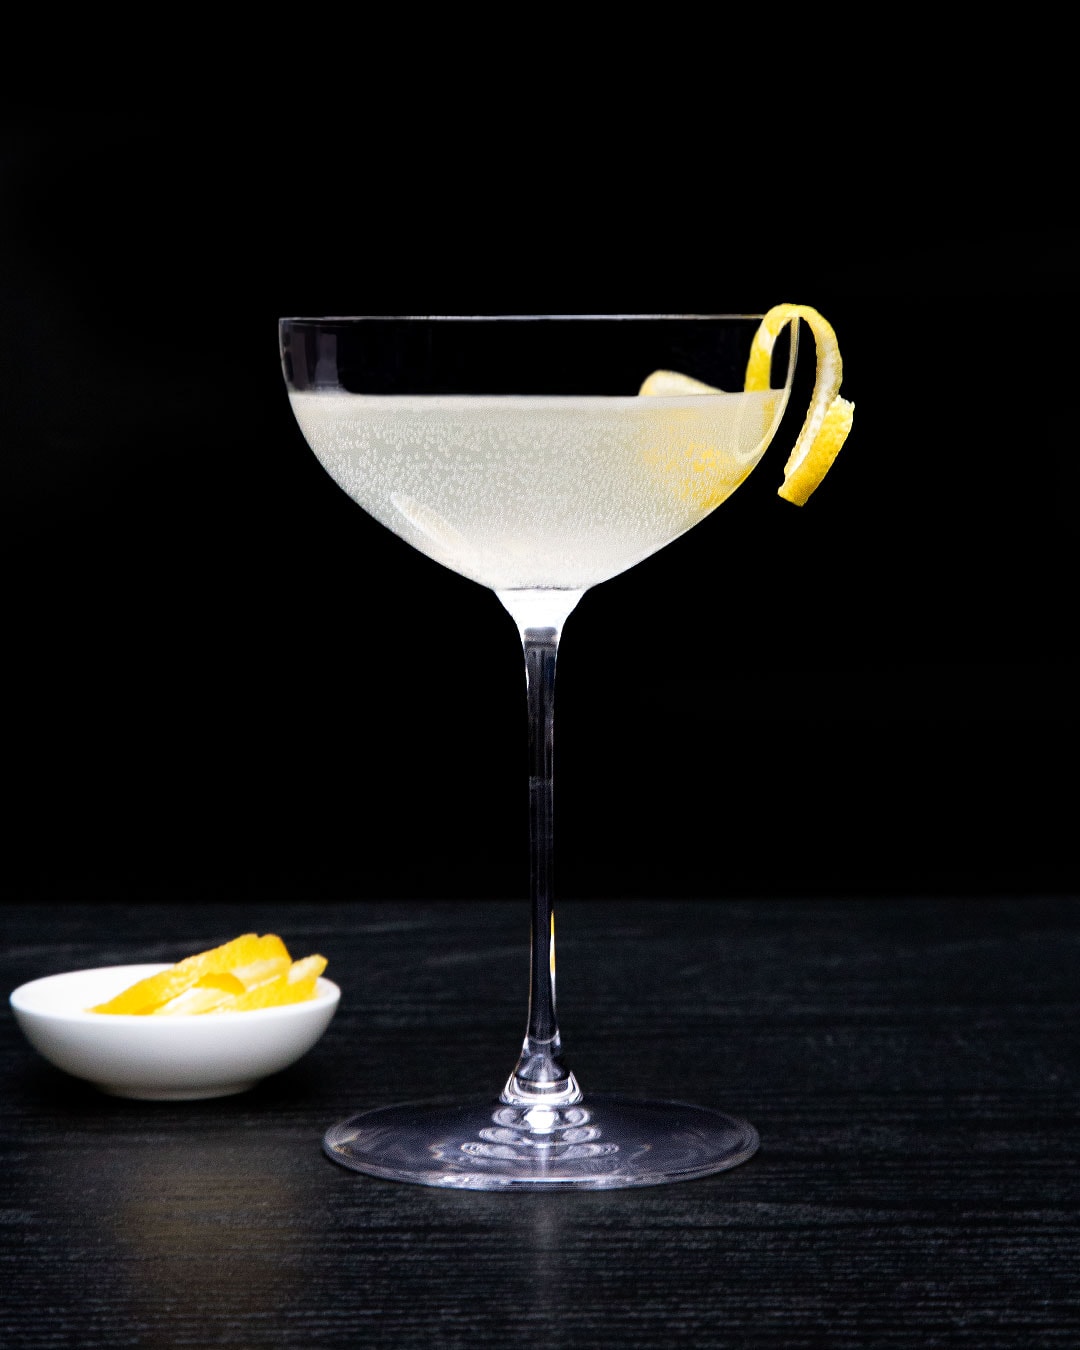 French 75 Mocktail with Lemon Twist in Coupe Glass and Black Background